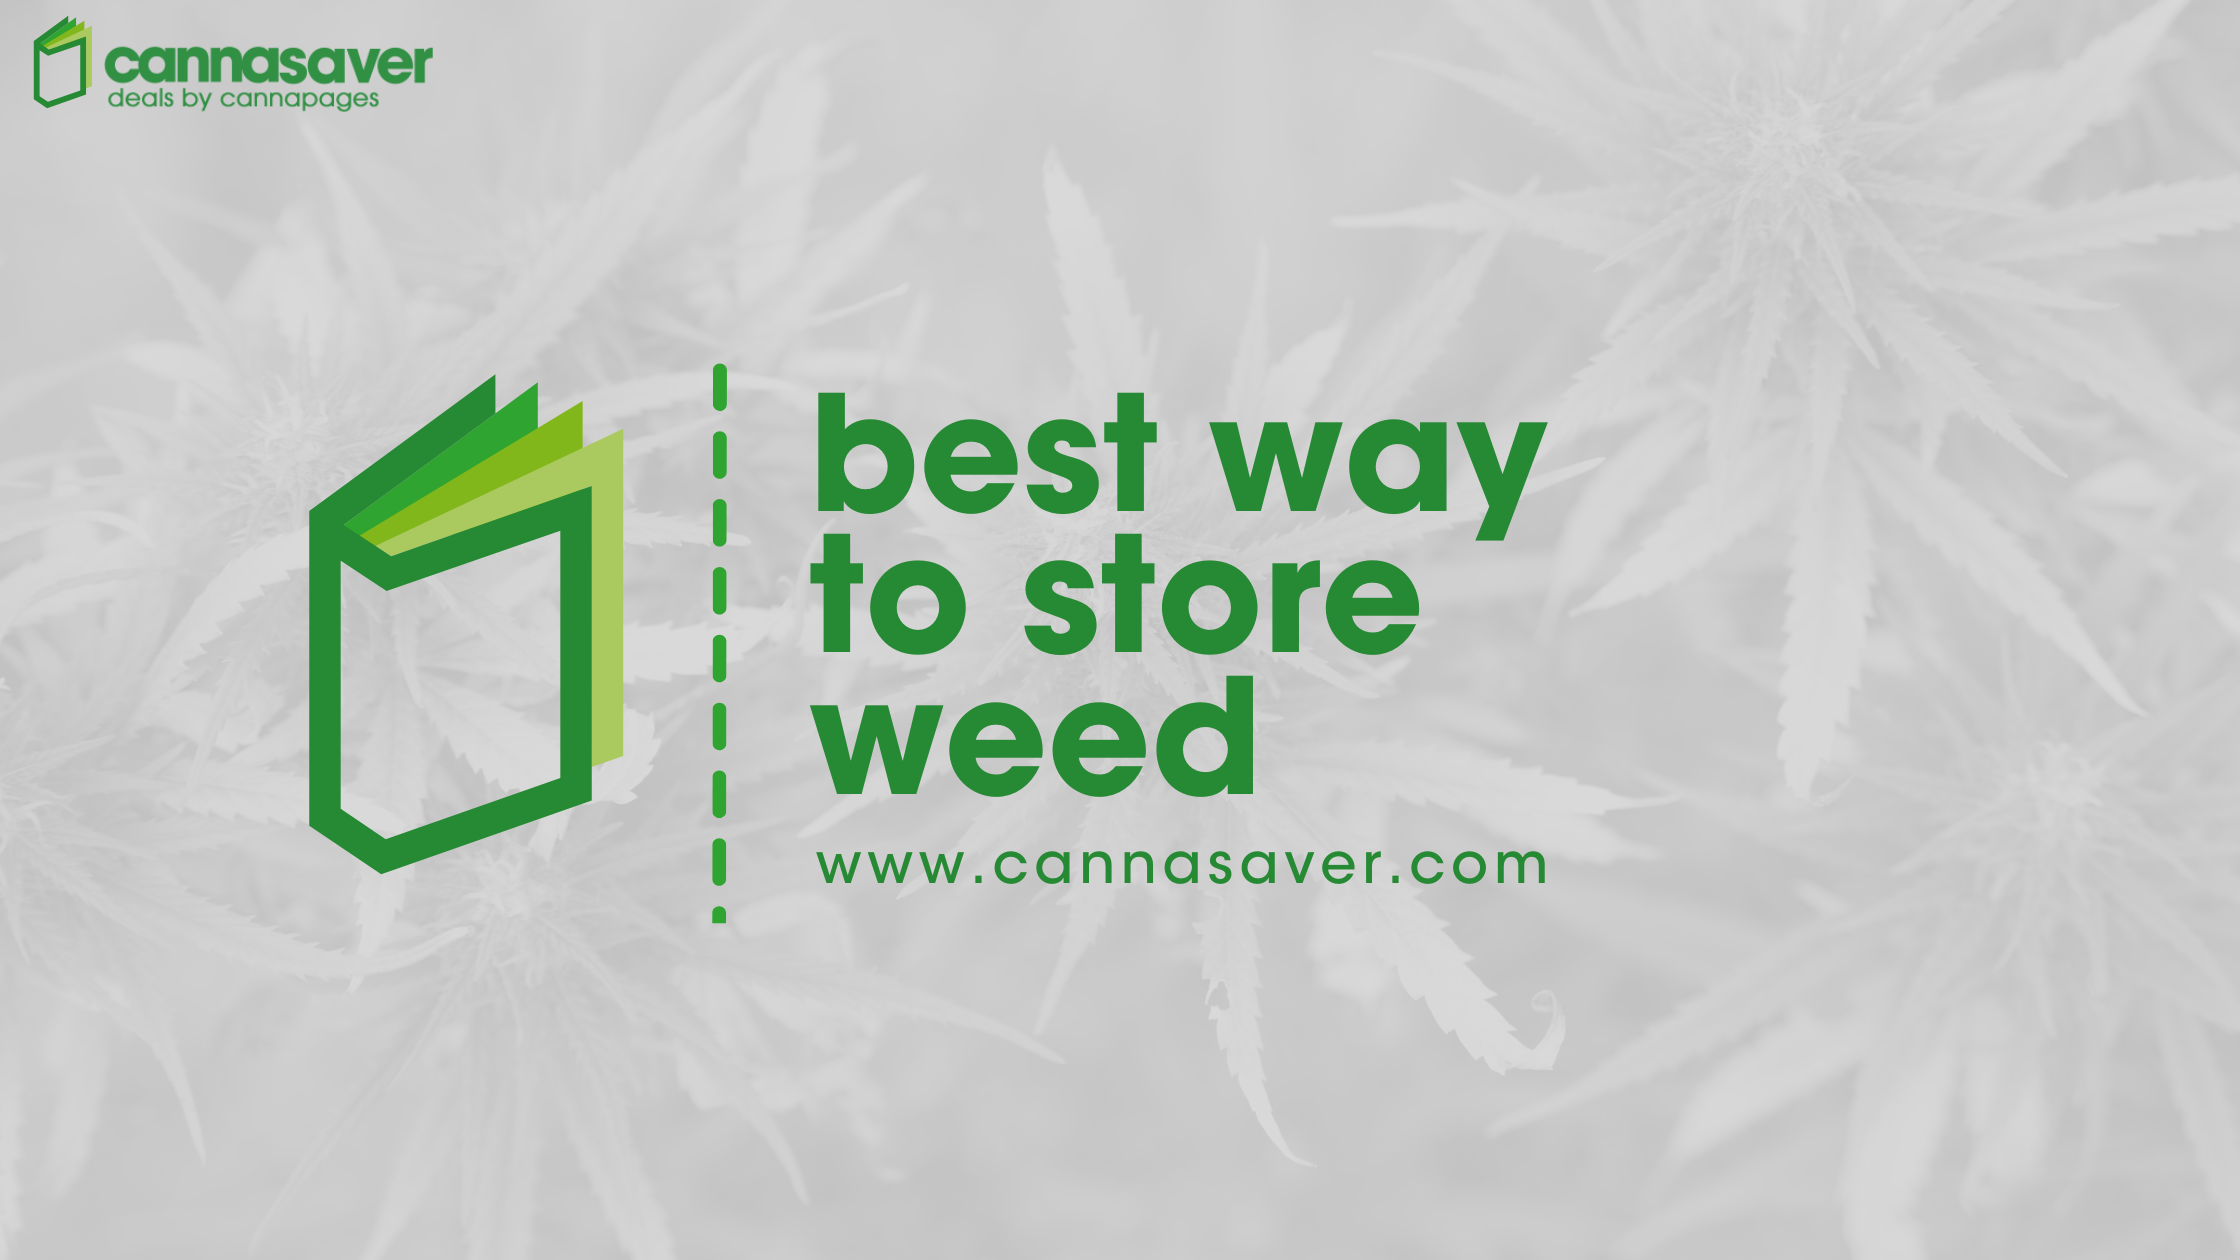 Best Way to Store Weed